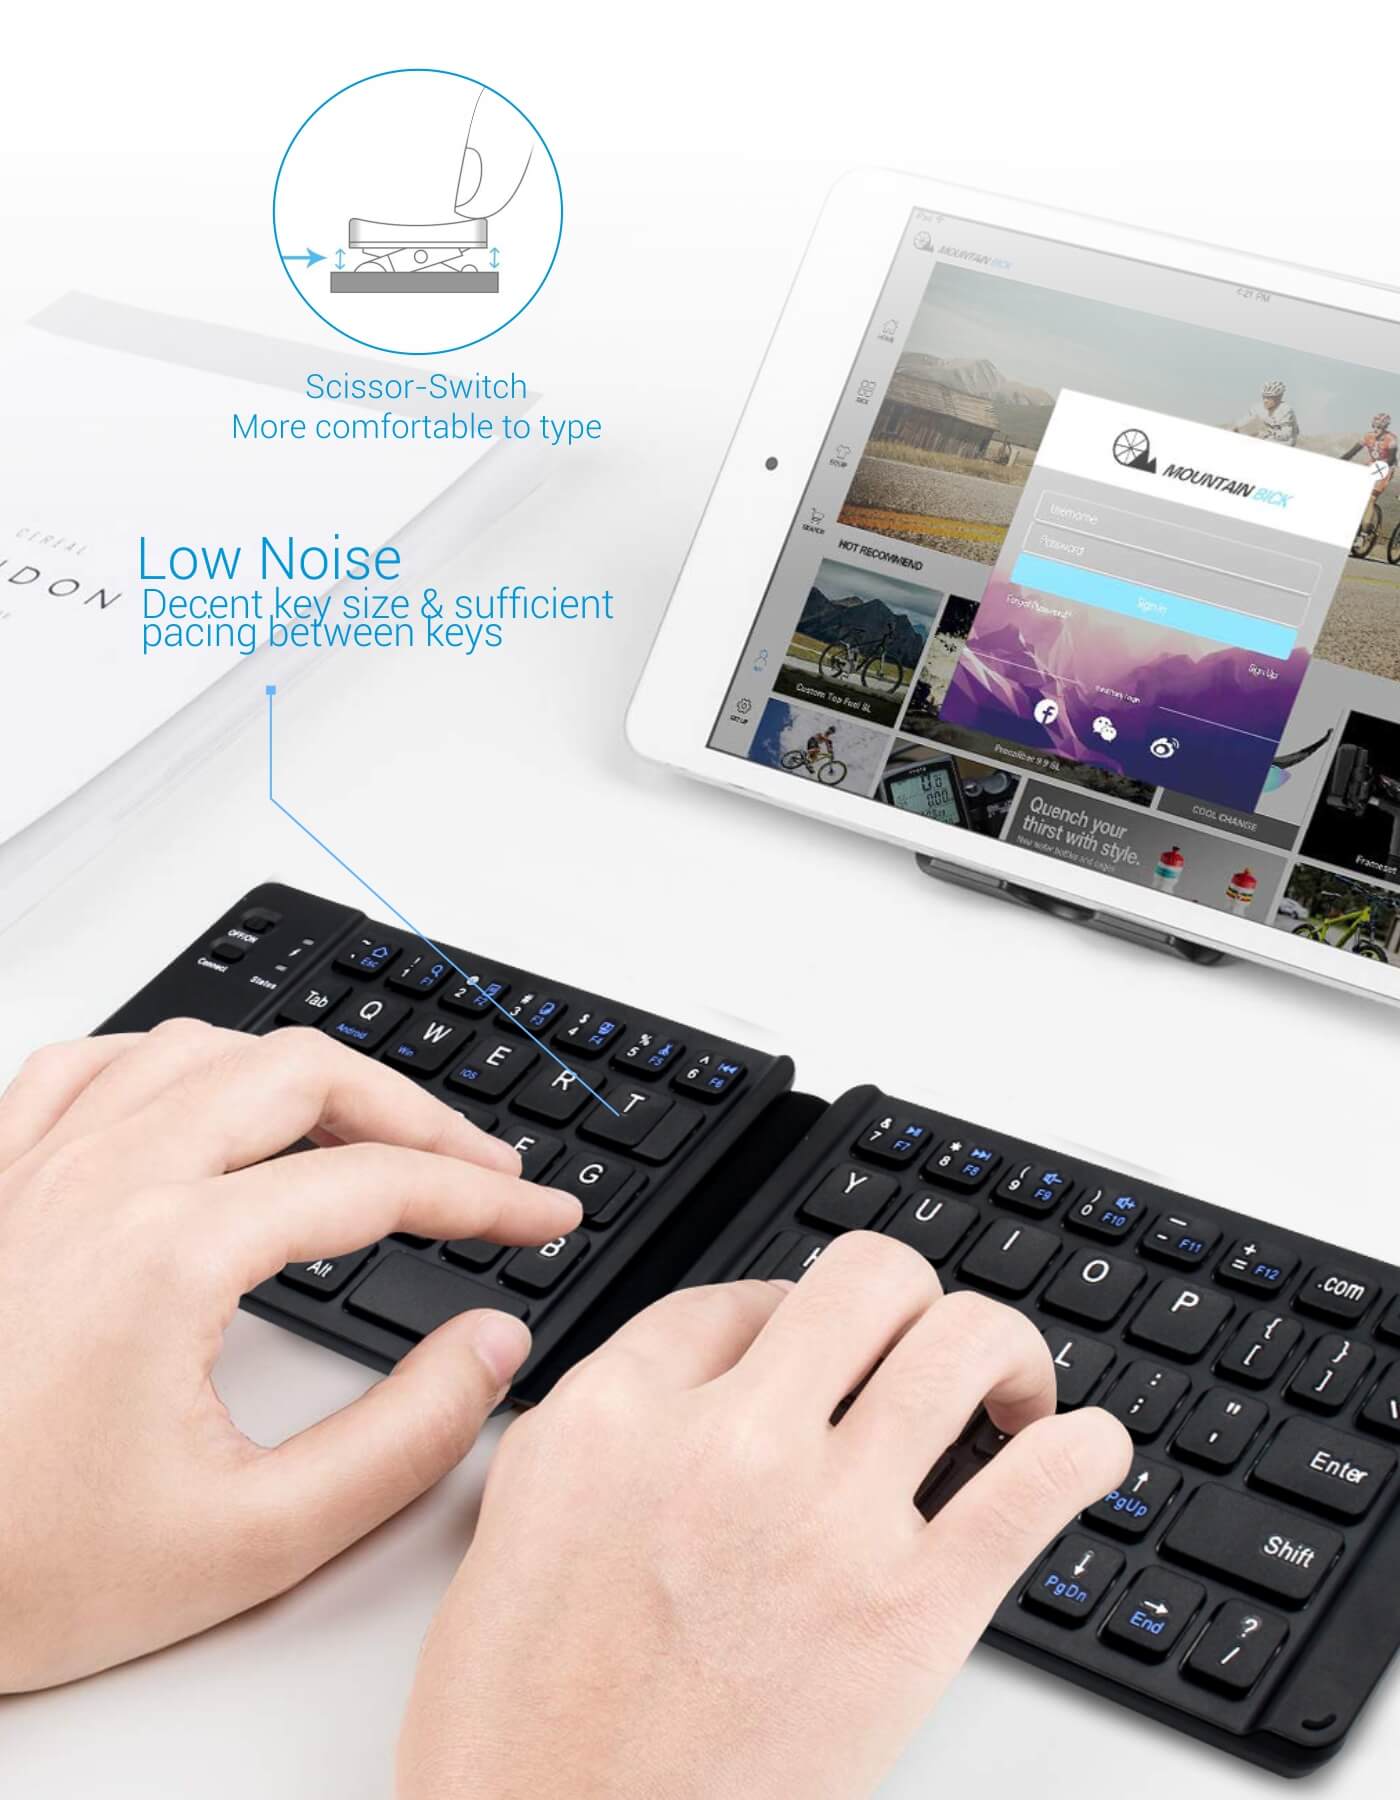 Portronics Chicklet Pocket Friendly price of Wireless Keyboard is 1149 rs